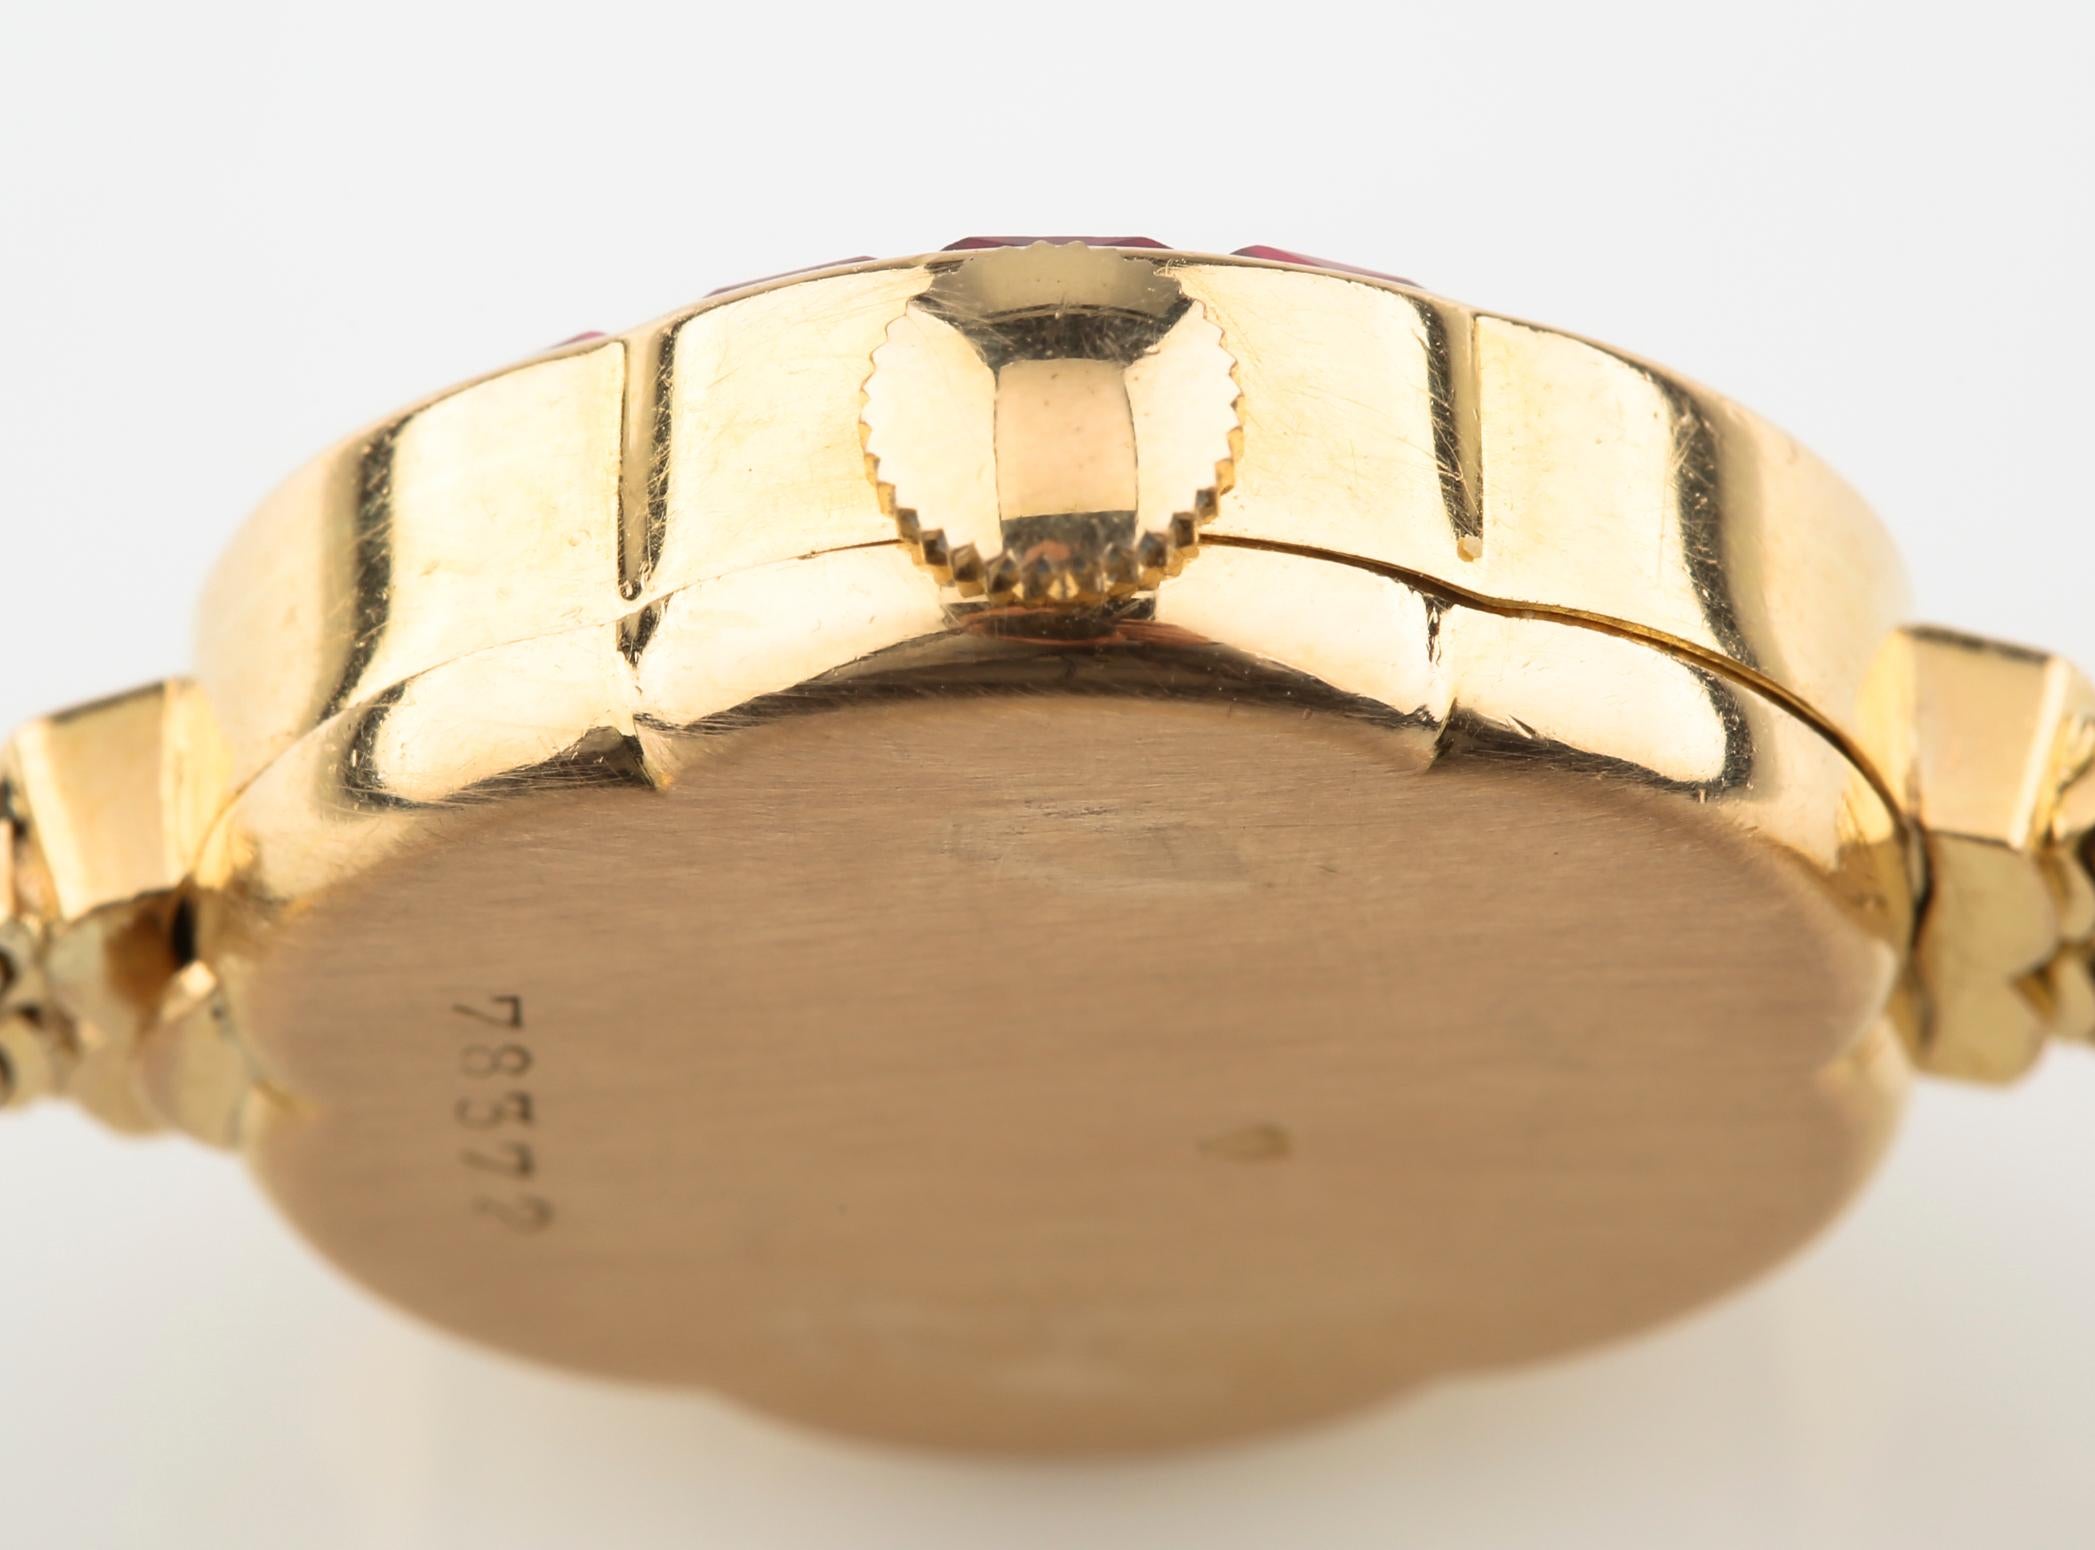 LIP Ruby Bezel Hand-Winding 18 Karat Yellow Gold Women's Watch with Gold Band In Good Condition For Sale In Sherman Oaks, CA